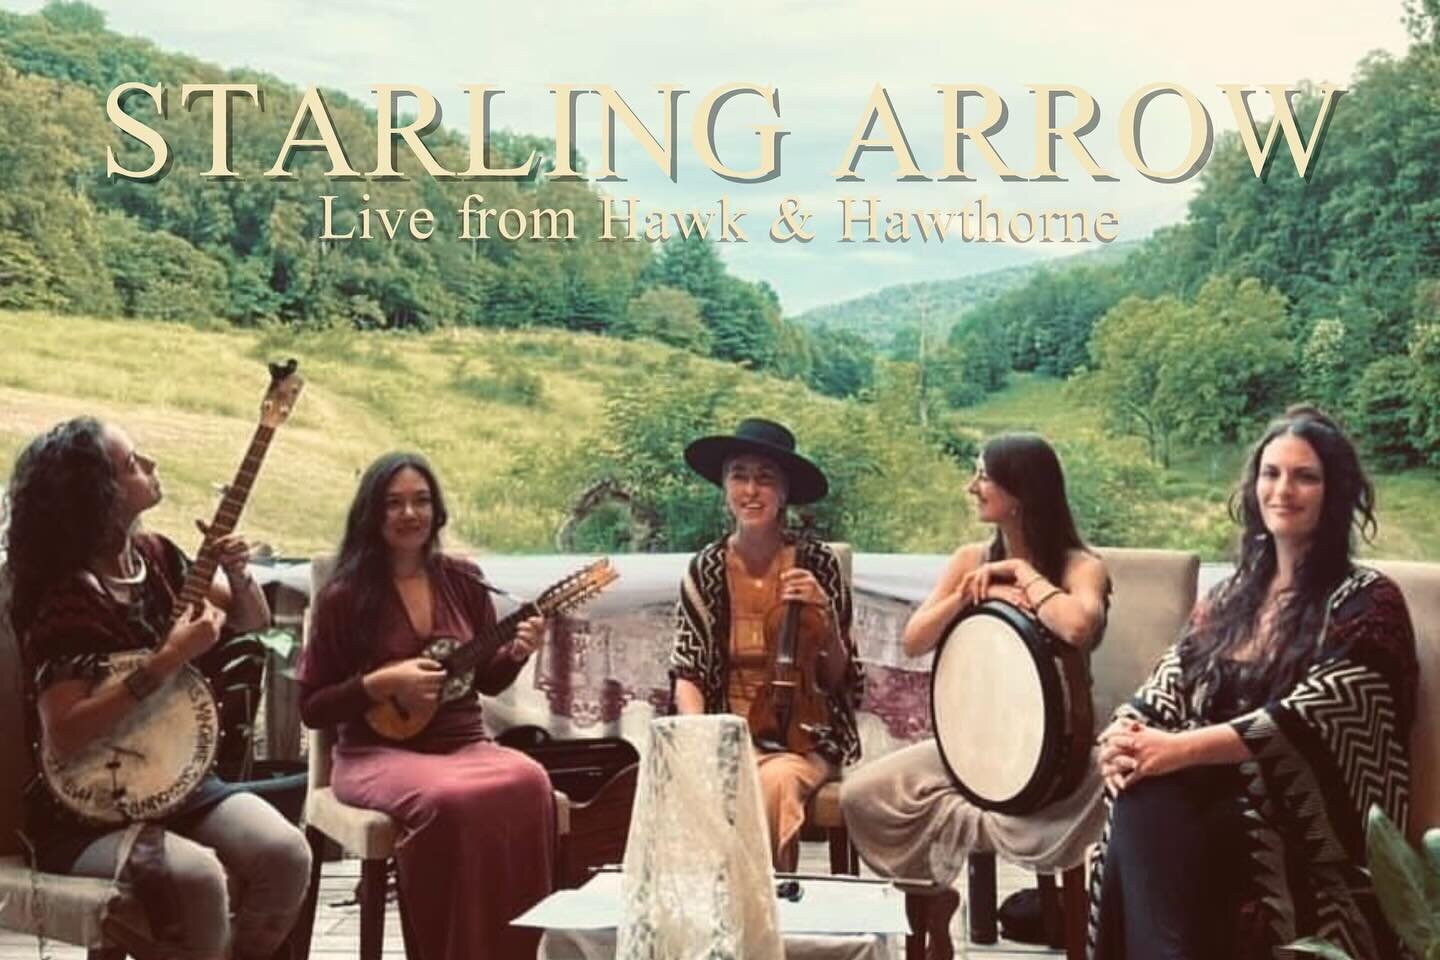 Special @starlingarrow announcement 

To celebrate our 1 year anniversary of CRADLE we have created a magical live stream this Friday of our first ever concert together from @hawkandhawthorne! The recording will be available on demand as well. 

🎟️ 